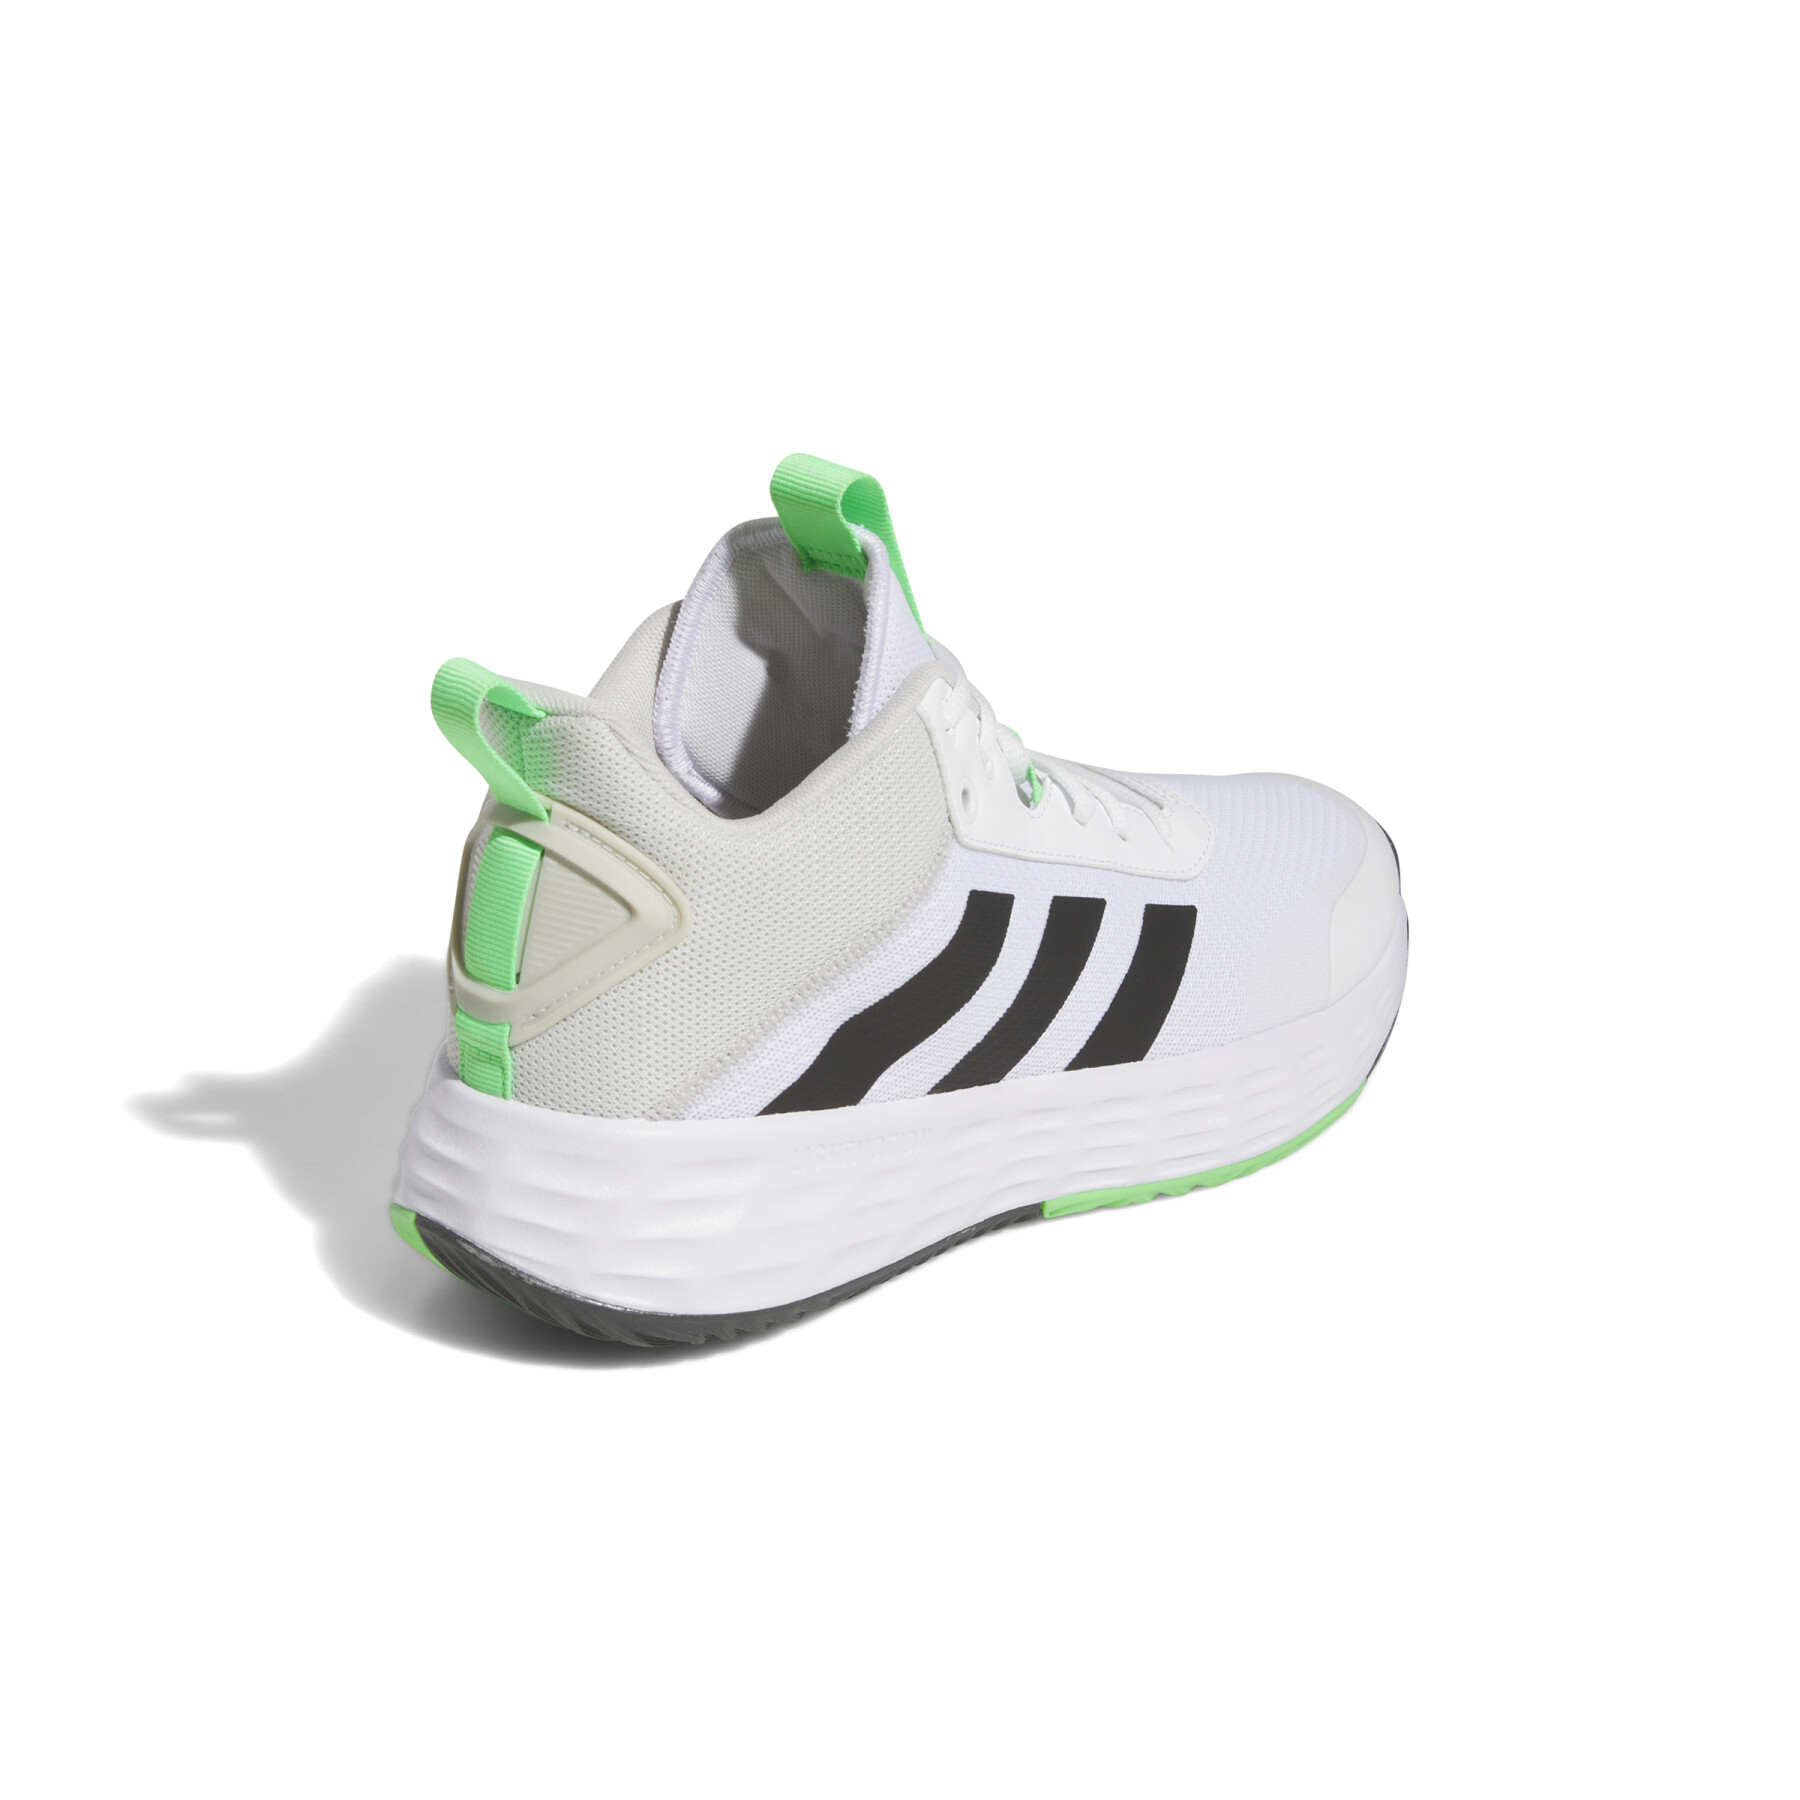 Indoor Sports Shoes adidas Ownthegame 2.0